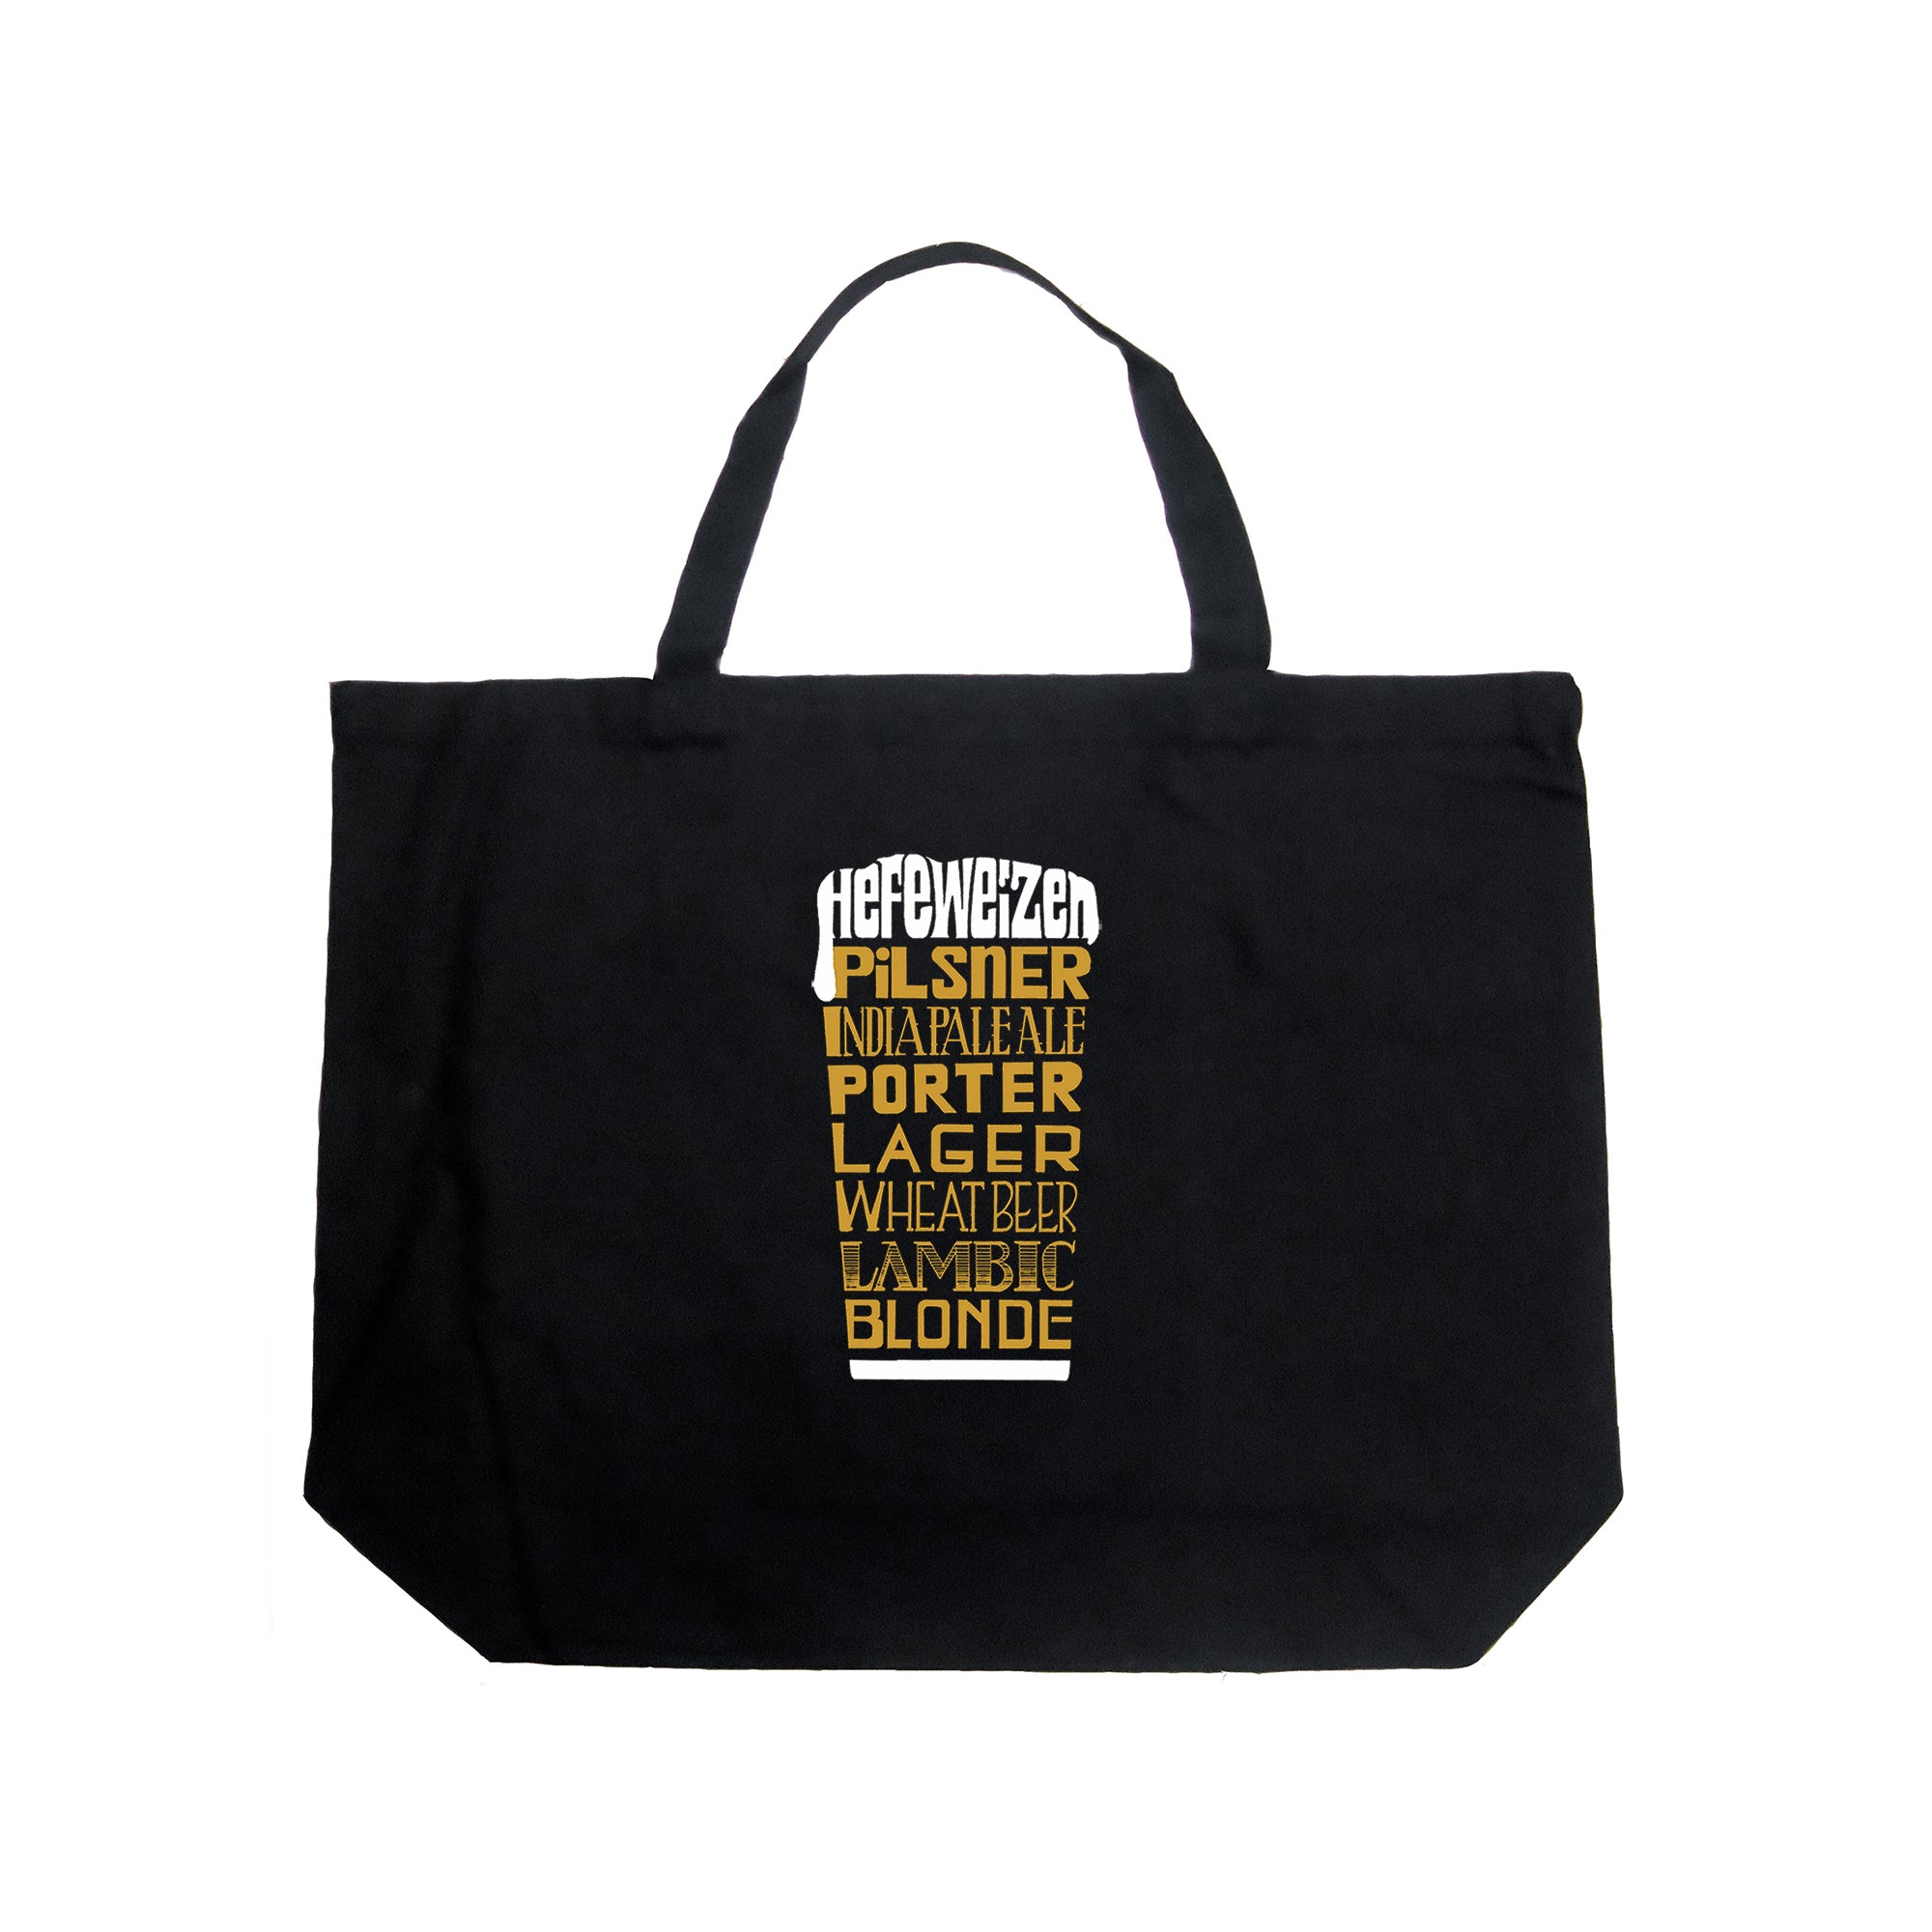 BEER SQUARE BAG 48S. - Clairefontaine